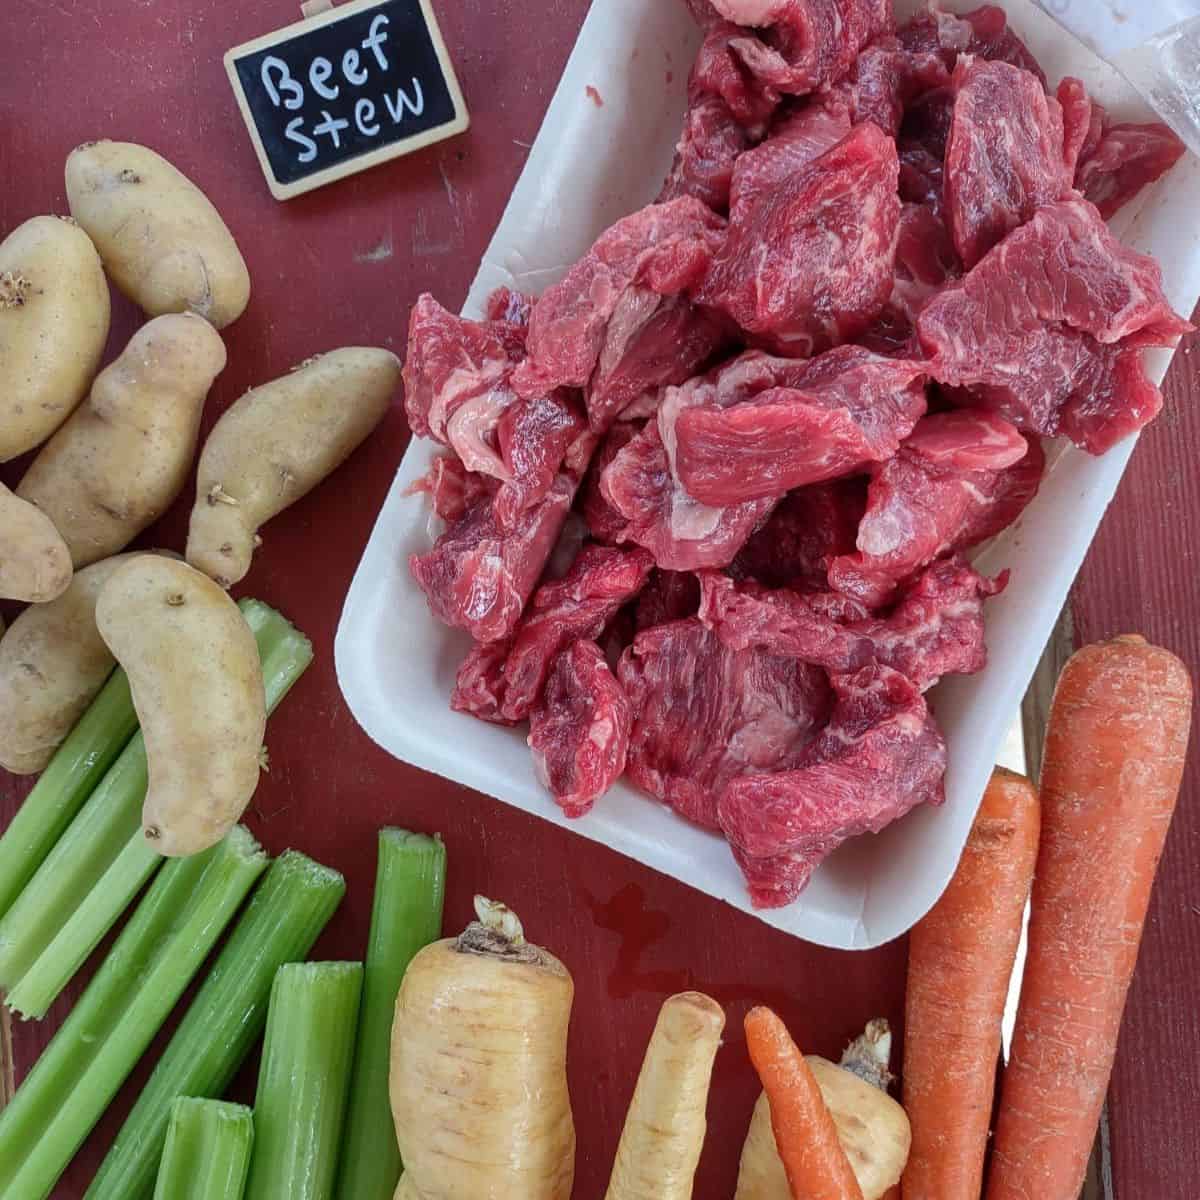 Raw beef stew meat with carrots, parsnips, celery, and Fingerling potatoes on a red table.